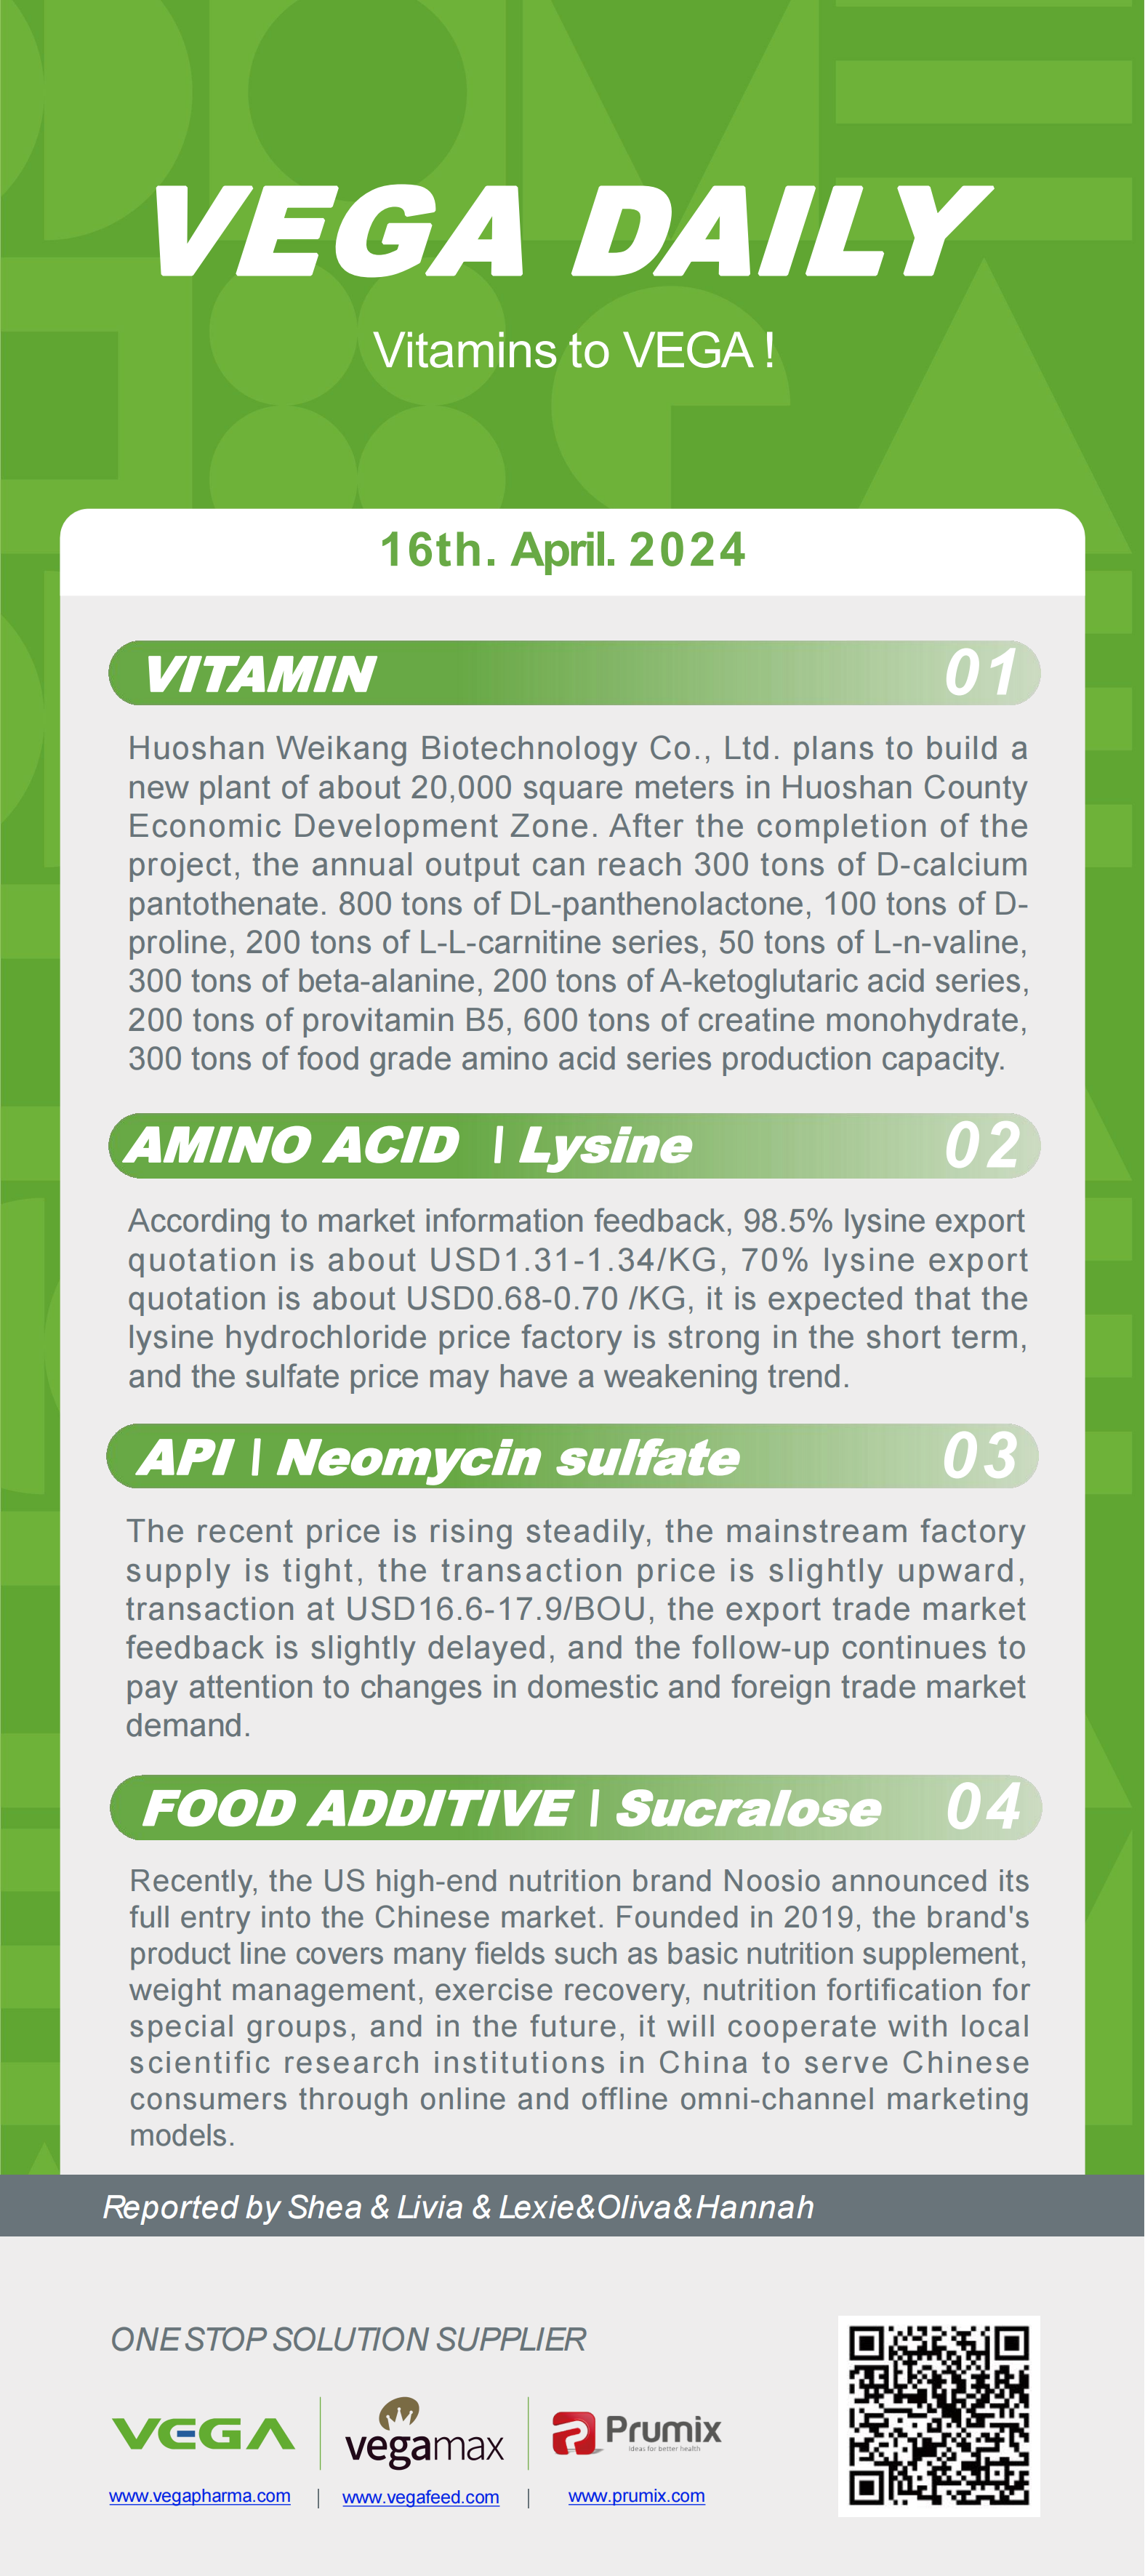 Vega Daily Dated on Apr 16th 2024 Vitamin Amino Acid APl Food Additives.png